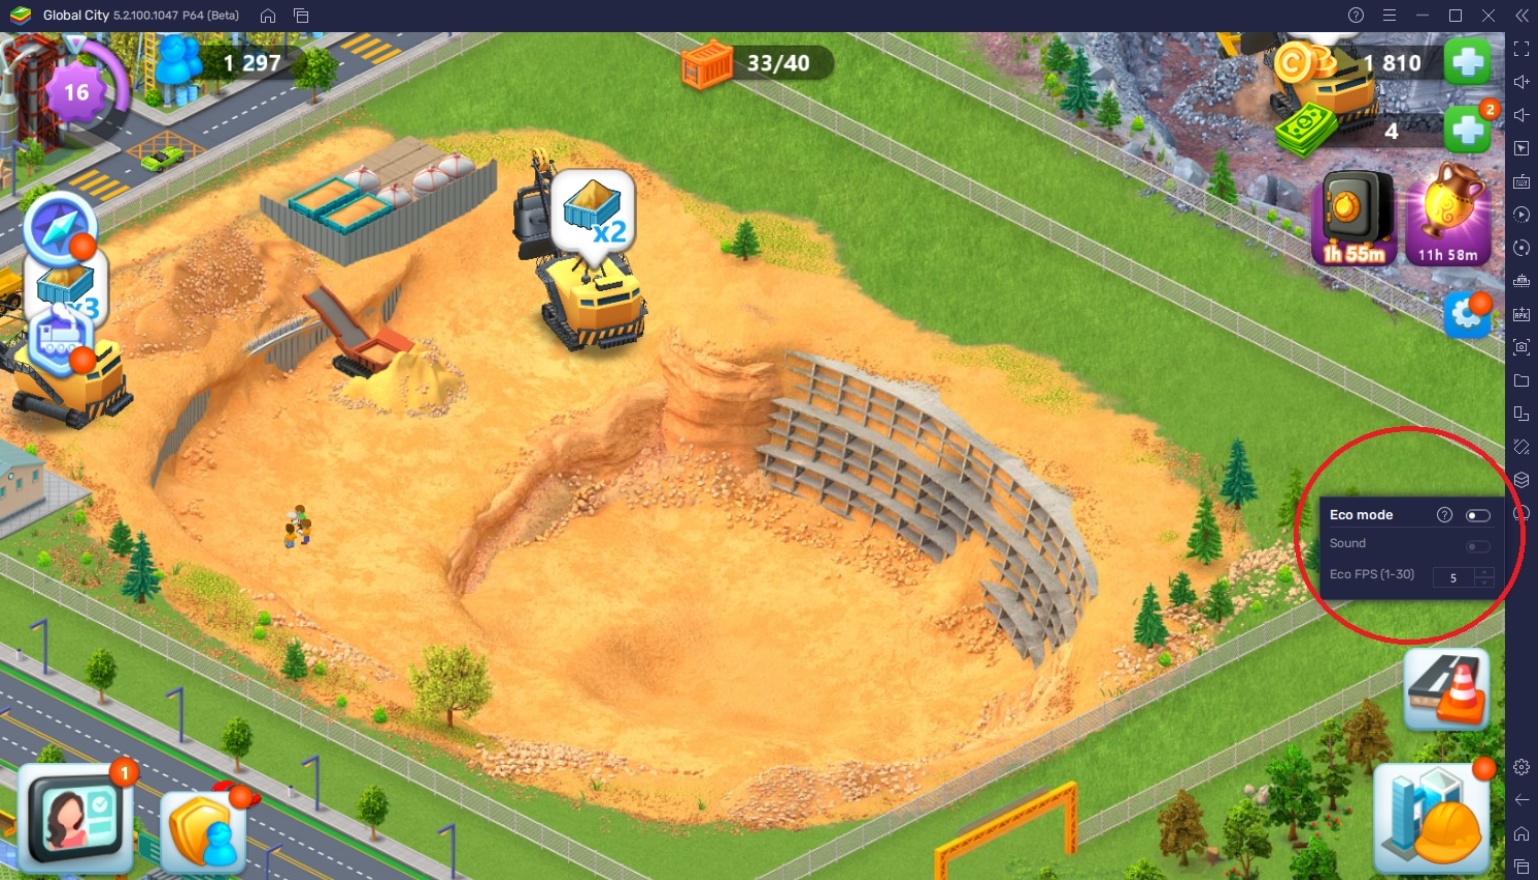 How to Play Global City: Build and Harvest on PC with BlueStacks